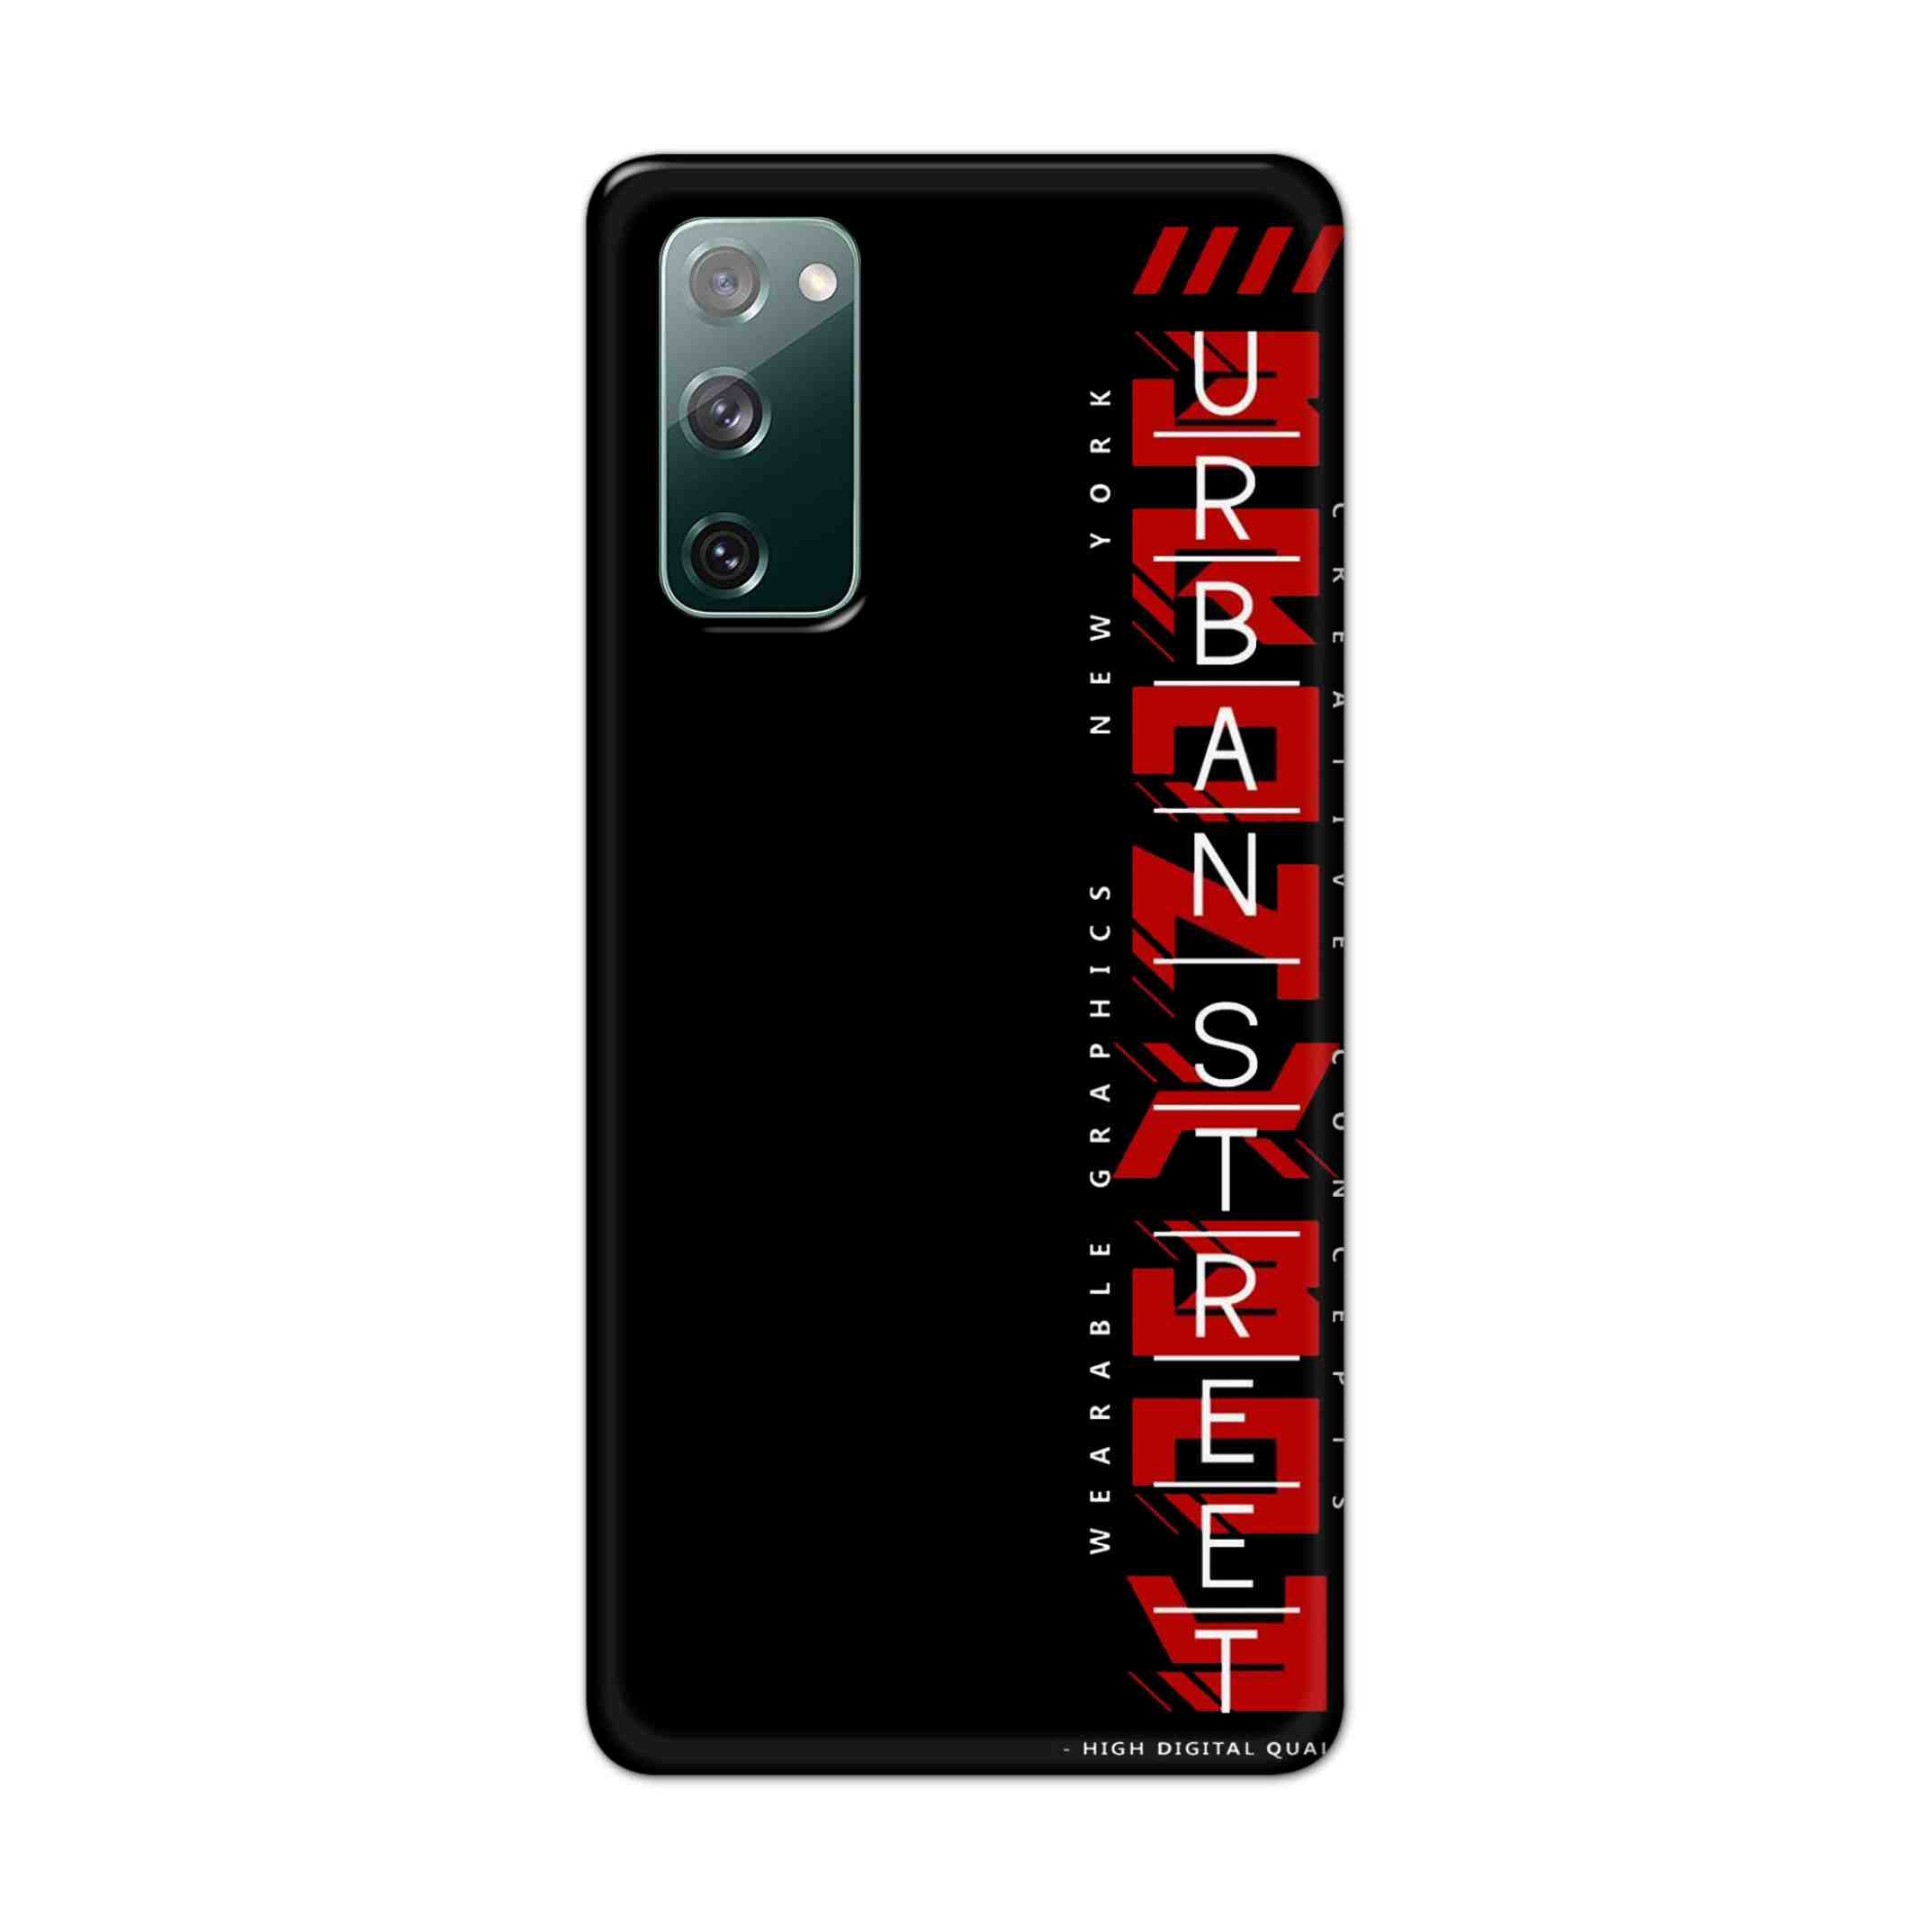 Buy Urban Street Hard Back Mobile Phone Case Cover For Samsung Galaxy S20 FE Online